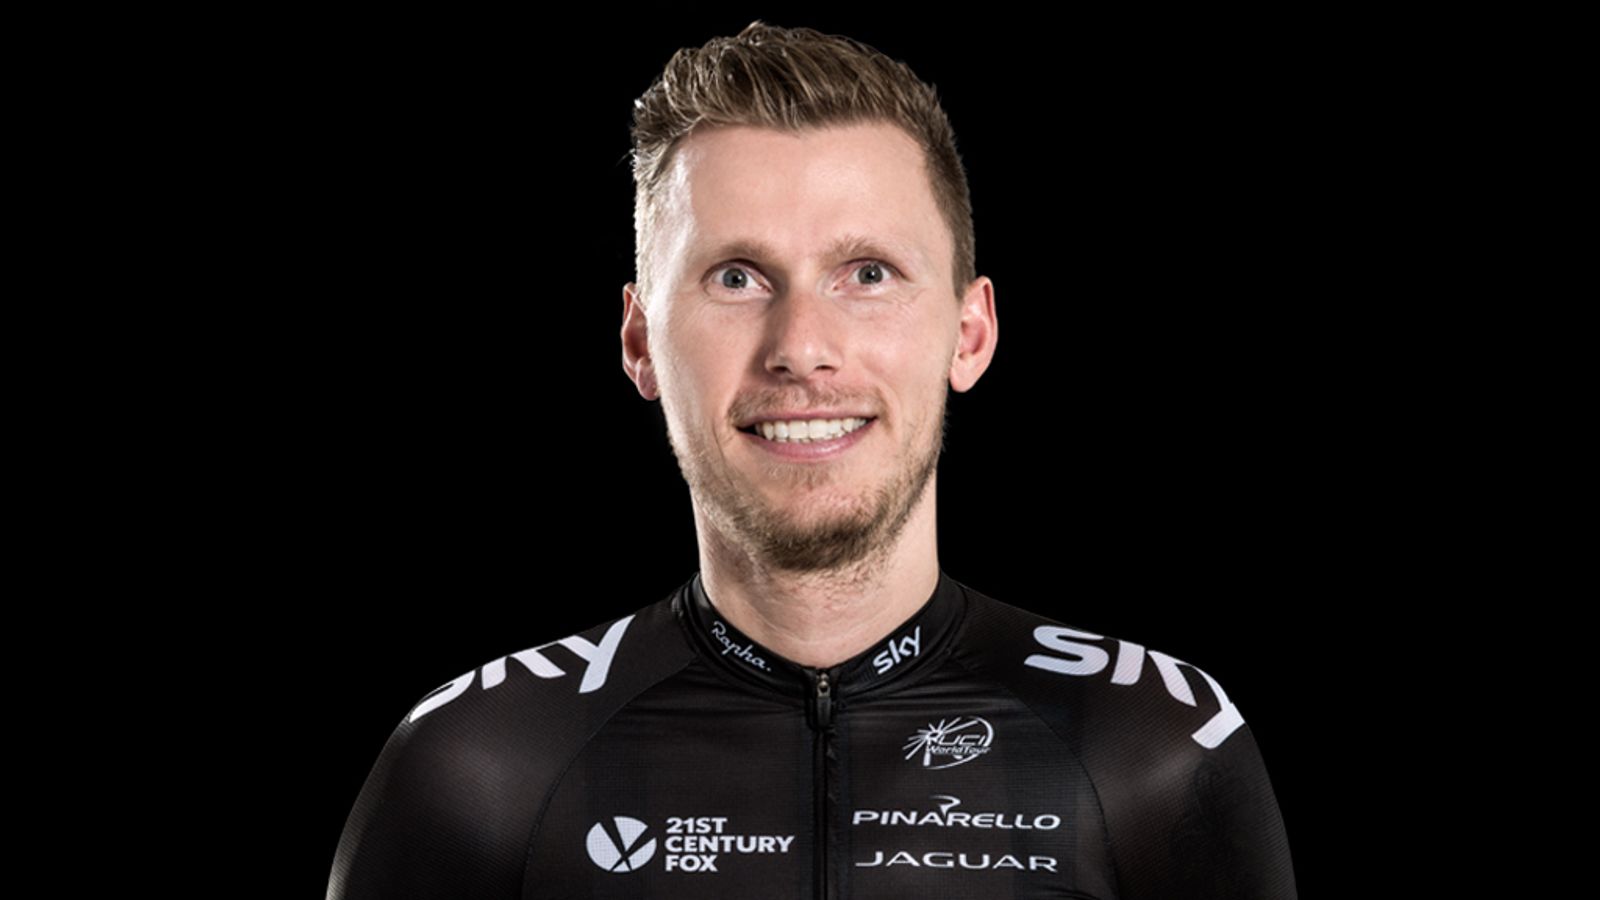 20 questions: Christian Knees | Cycling News | Sky Sports